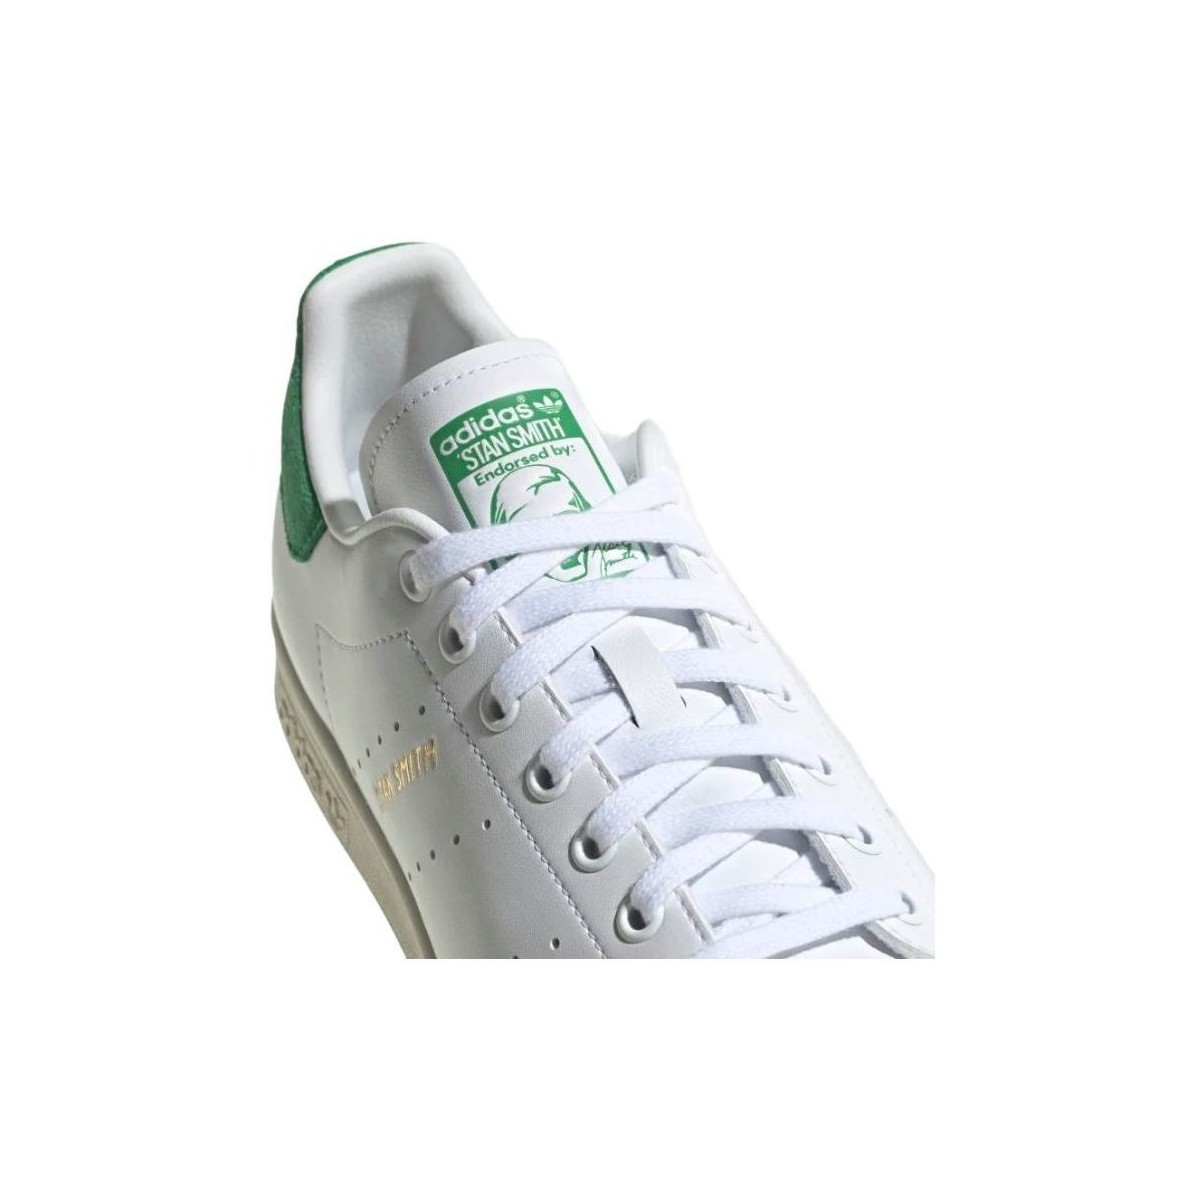 adidas Originals Blanc Baskets Stan Smith Cloud White/Green/Off White 68F12AaY